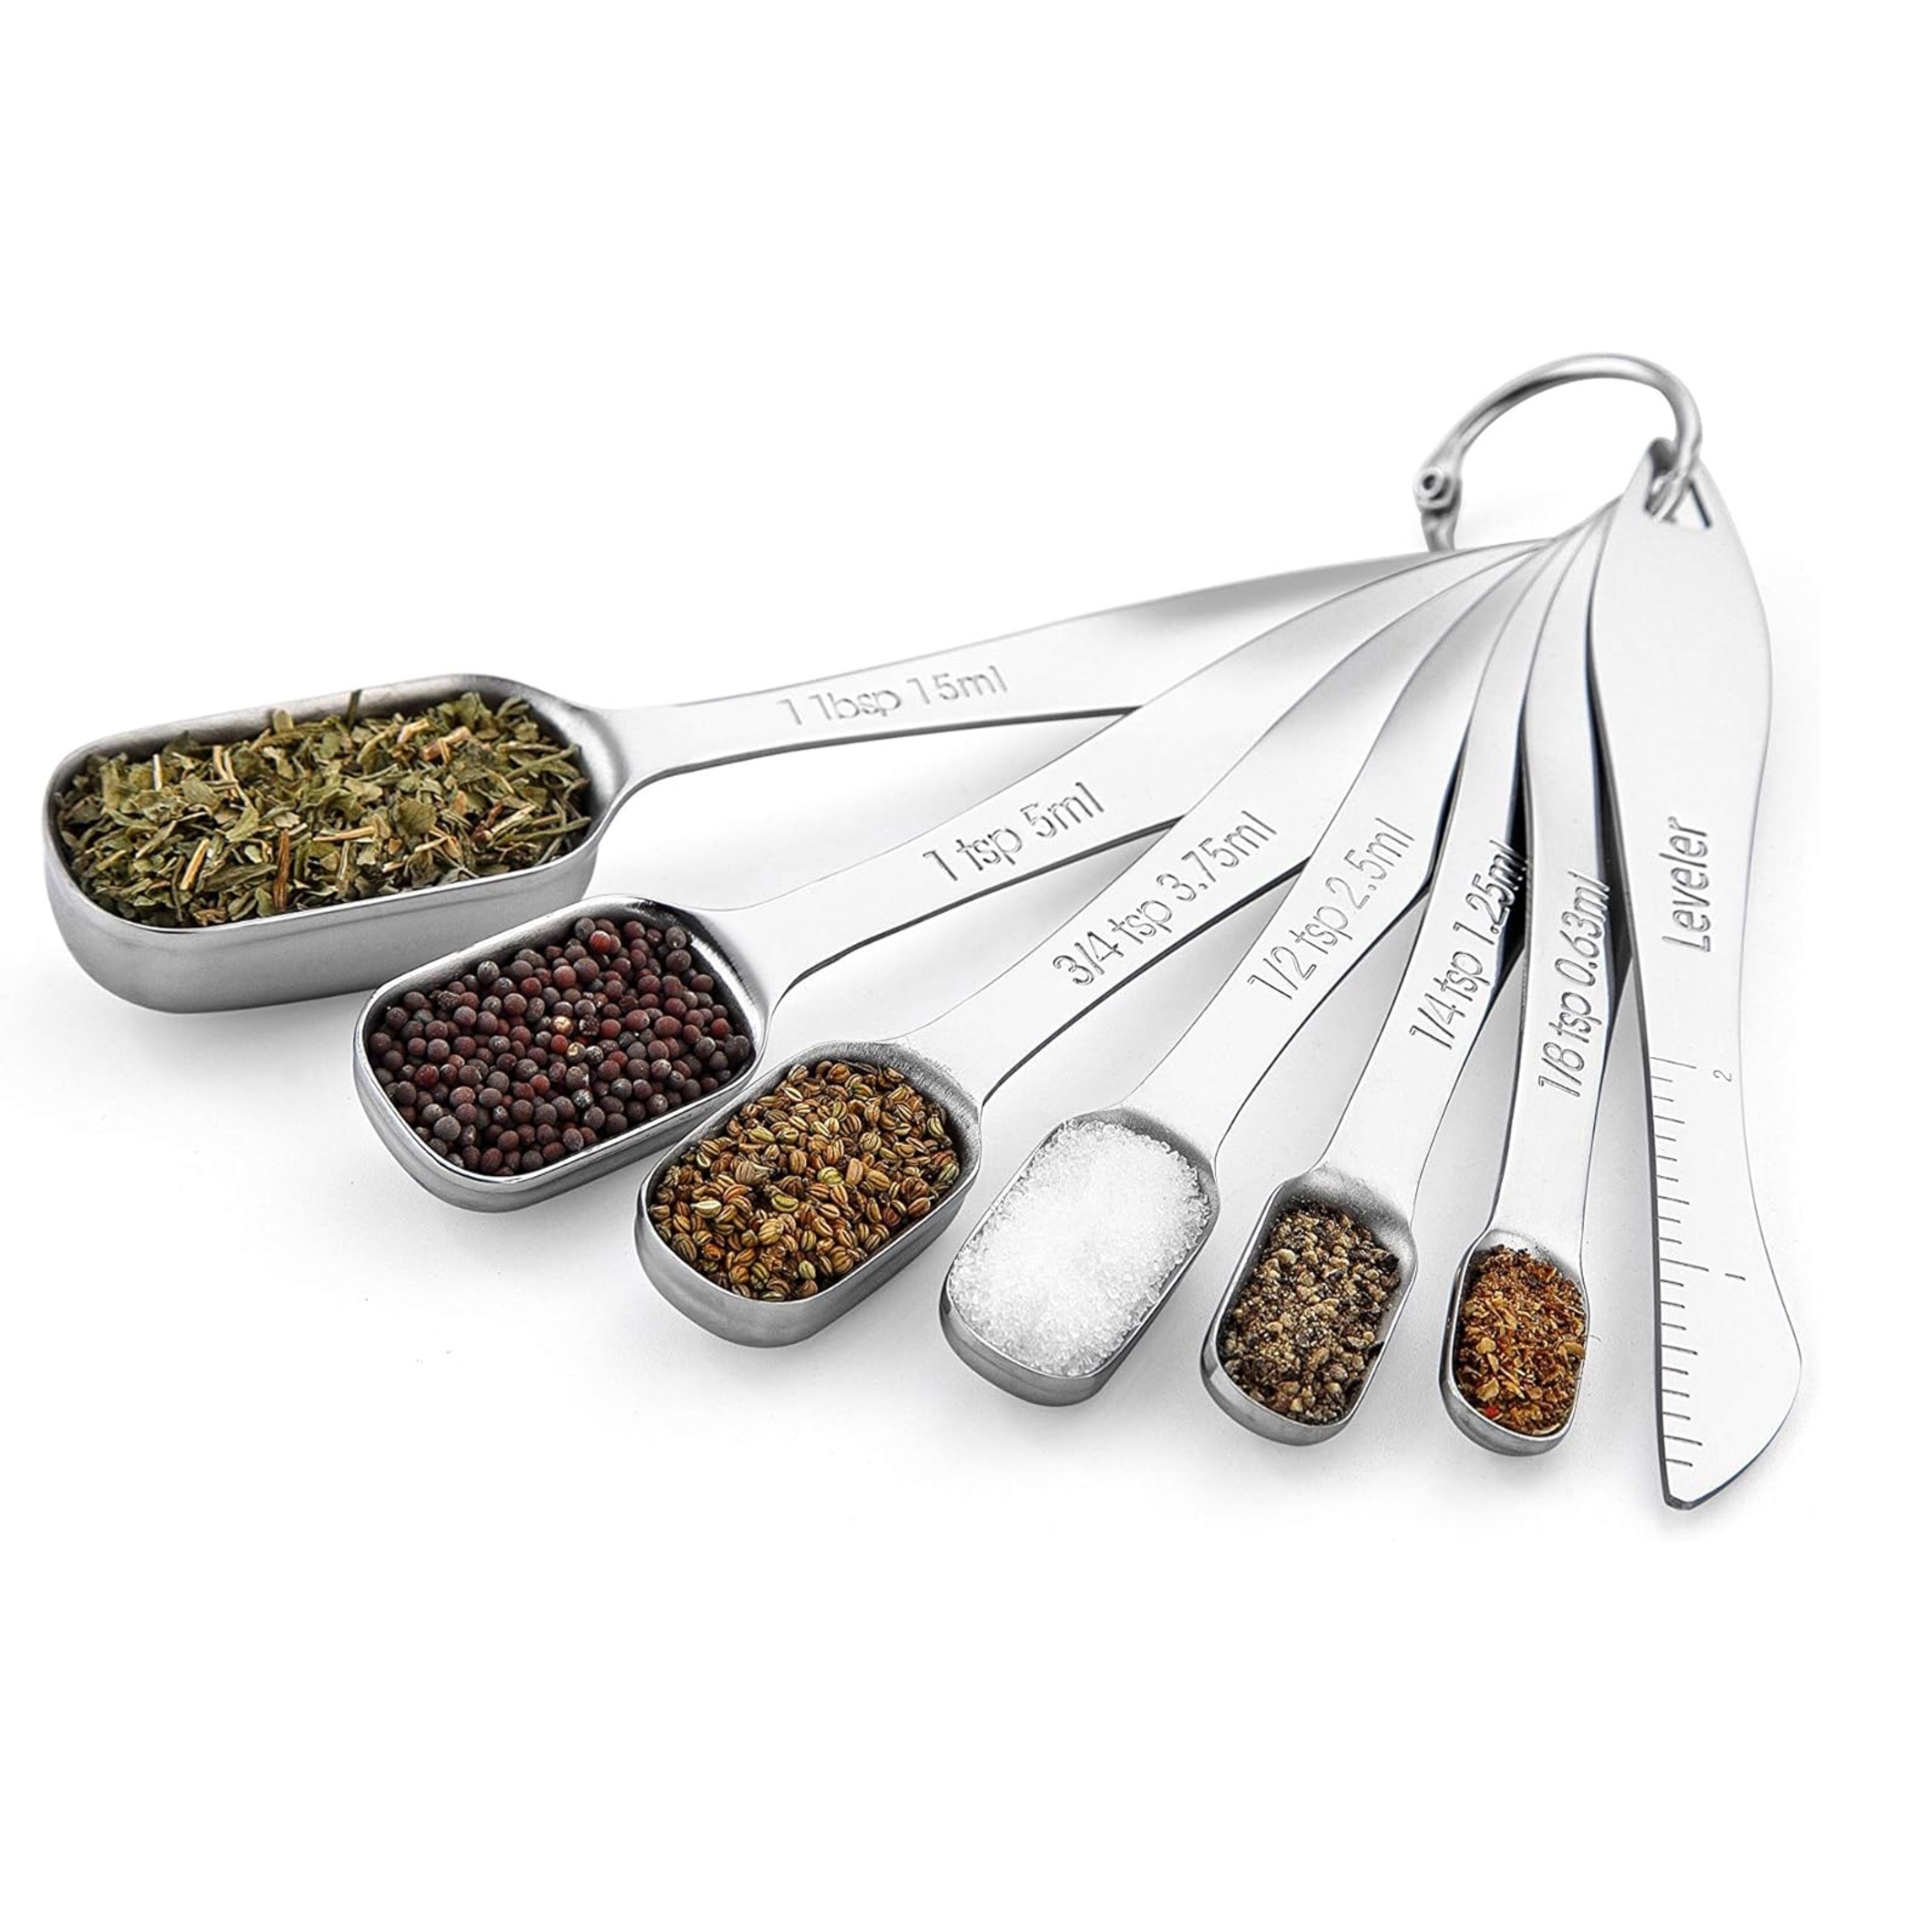 Gold Measuring Spoons - Set of 7 Includes Leveler - Premium Heavy-Duty  Stainless Steel, Narrow, Long Handle Design Fits in Spice Jar